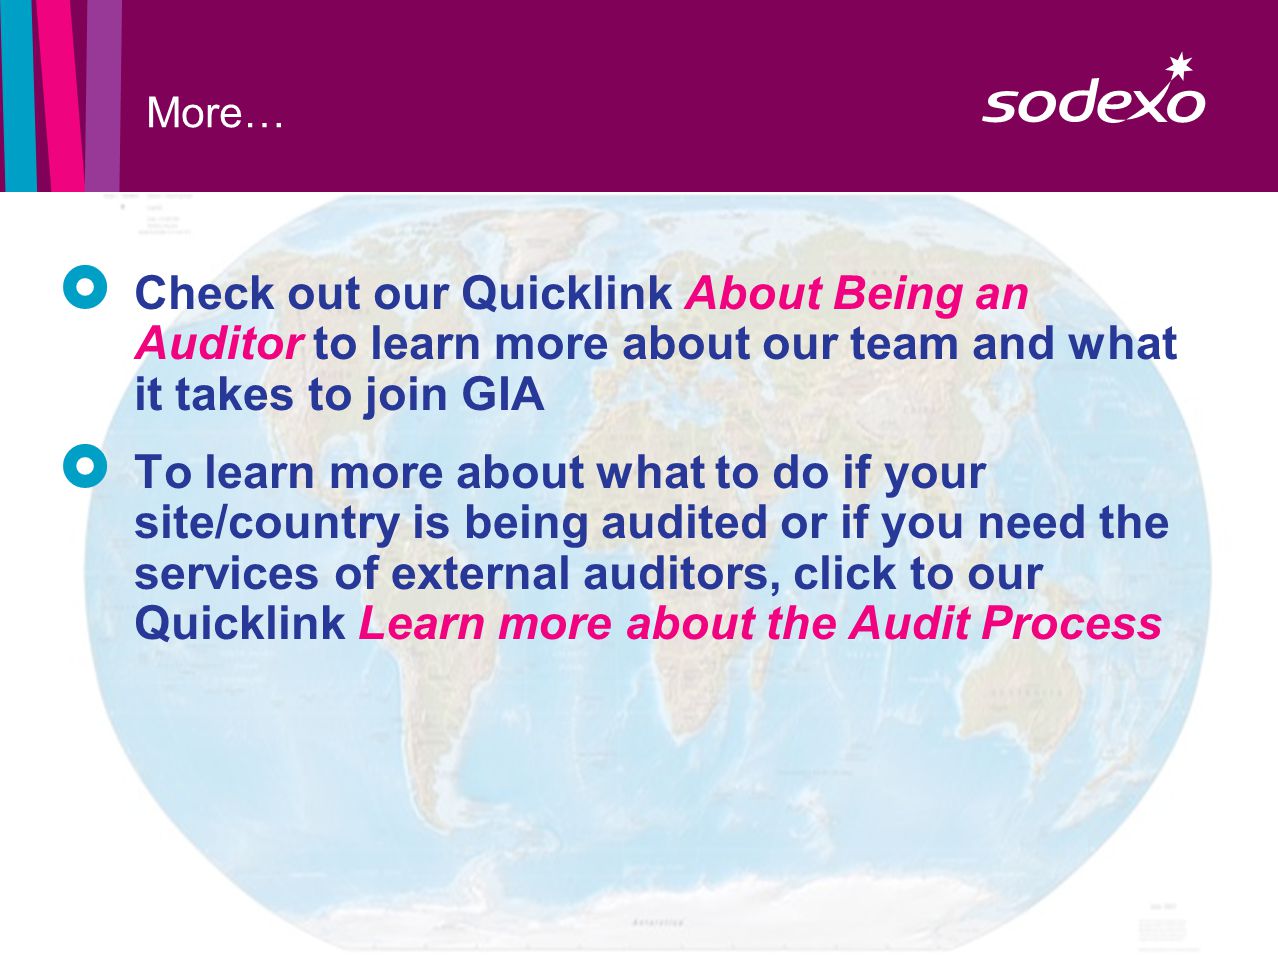 page 7 More…  Check out our Quicklink About Being an Auditor to learn more about our team and what it takes to join GIA  To learn more about what to do if your site/country is being audited or if you need the services of external auditors, click to our Quicklink Learn more about the Audit Process